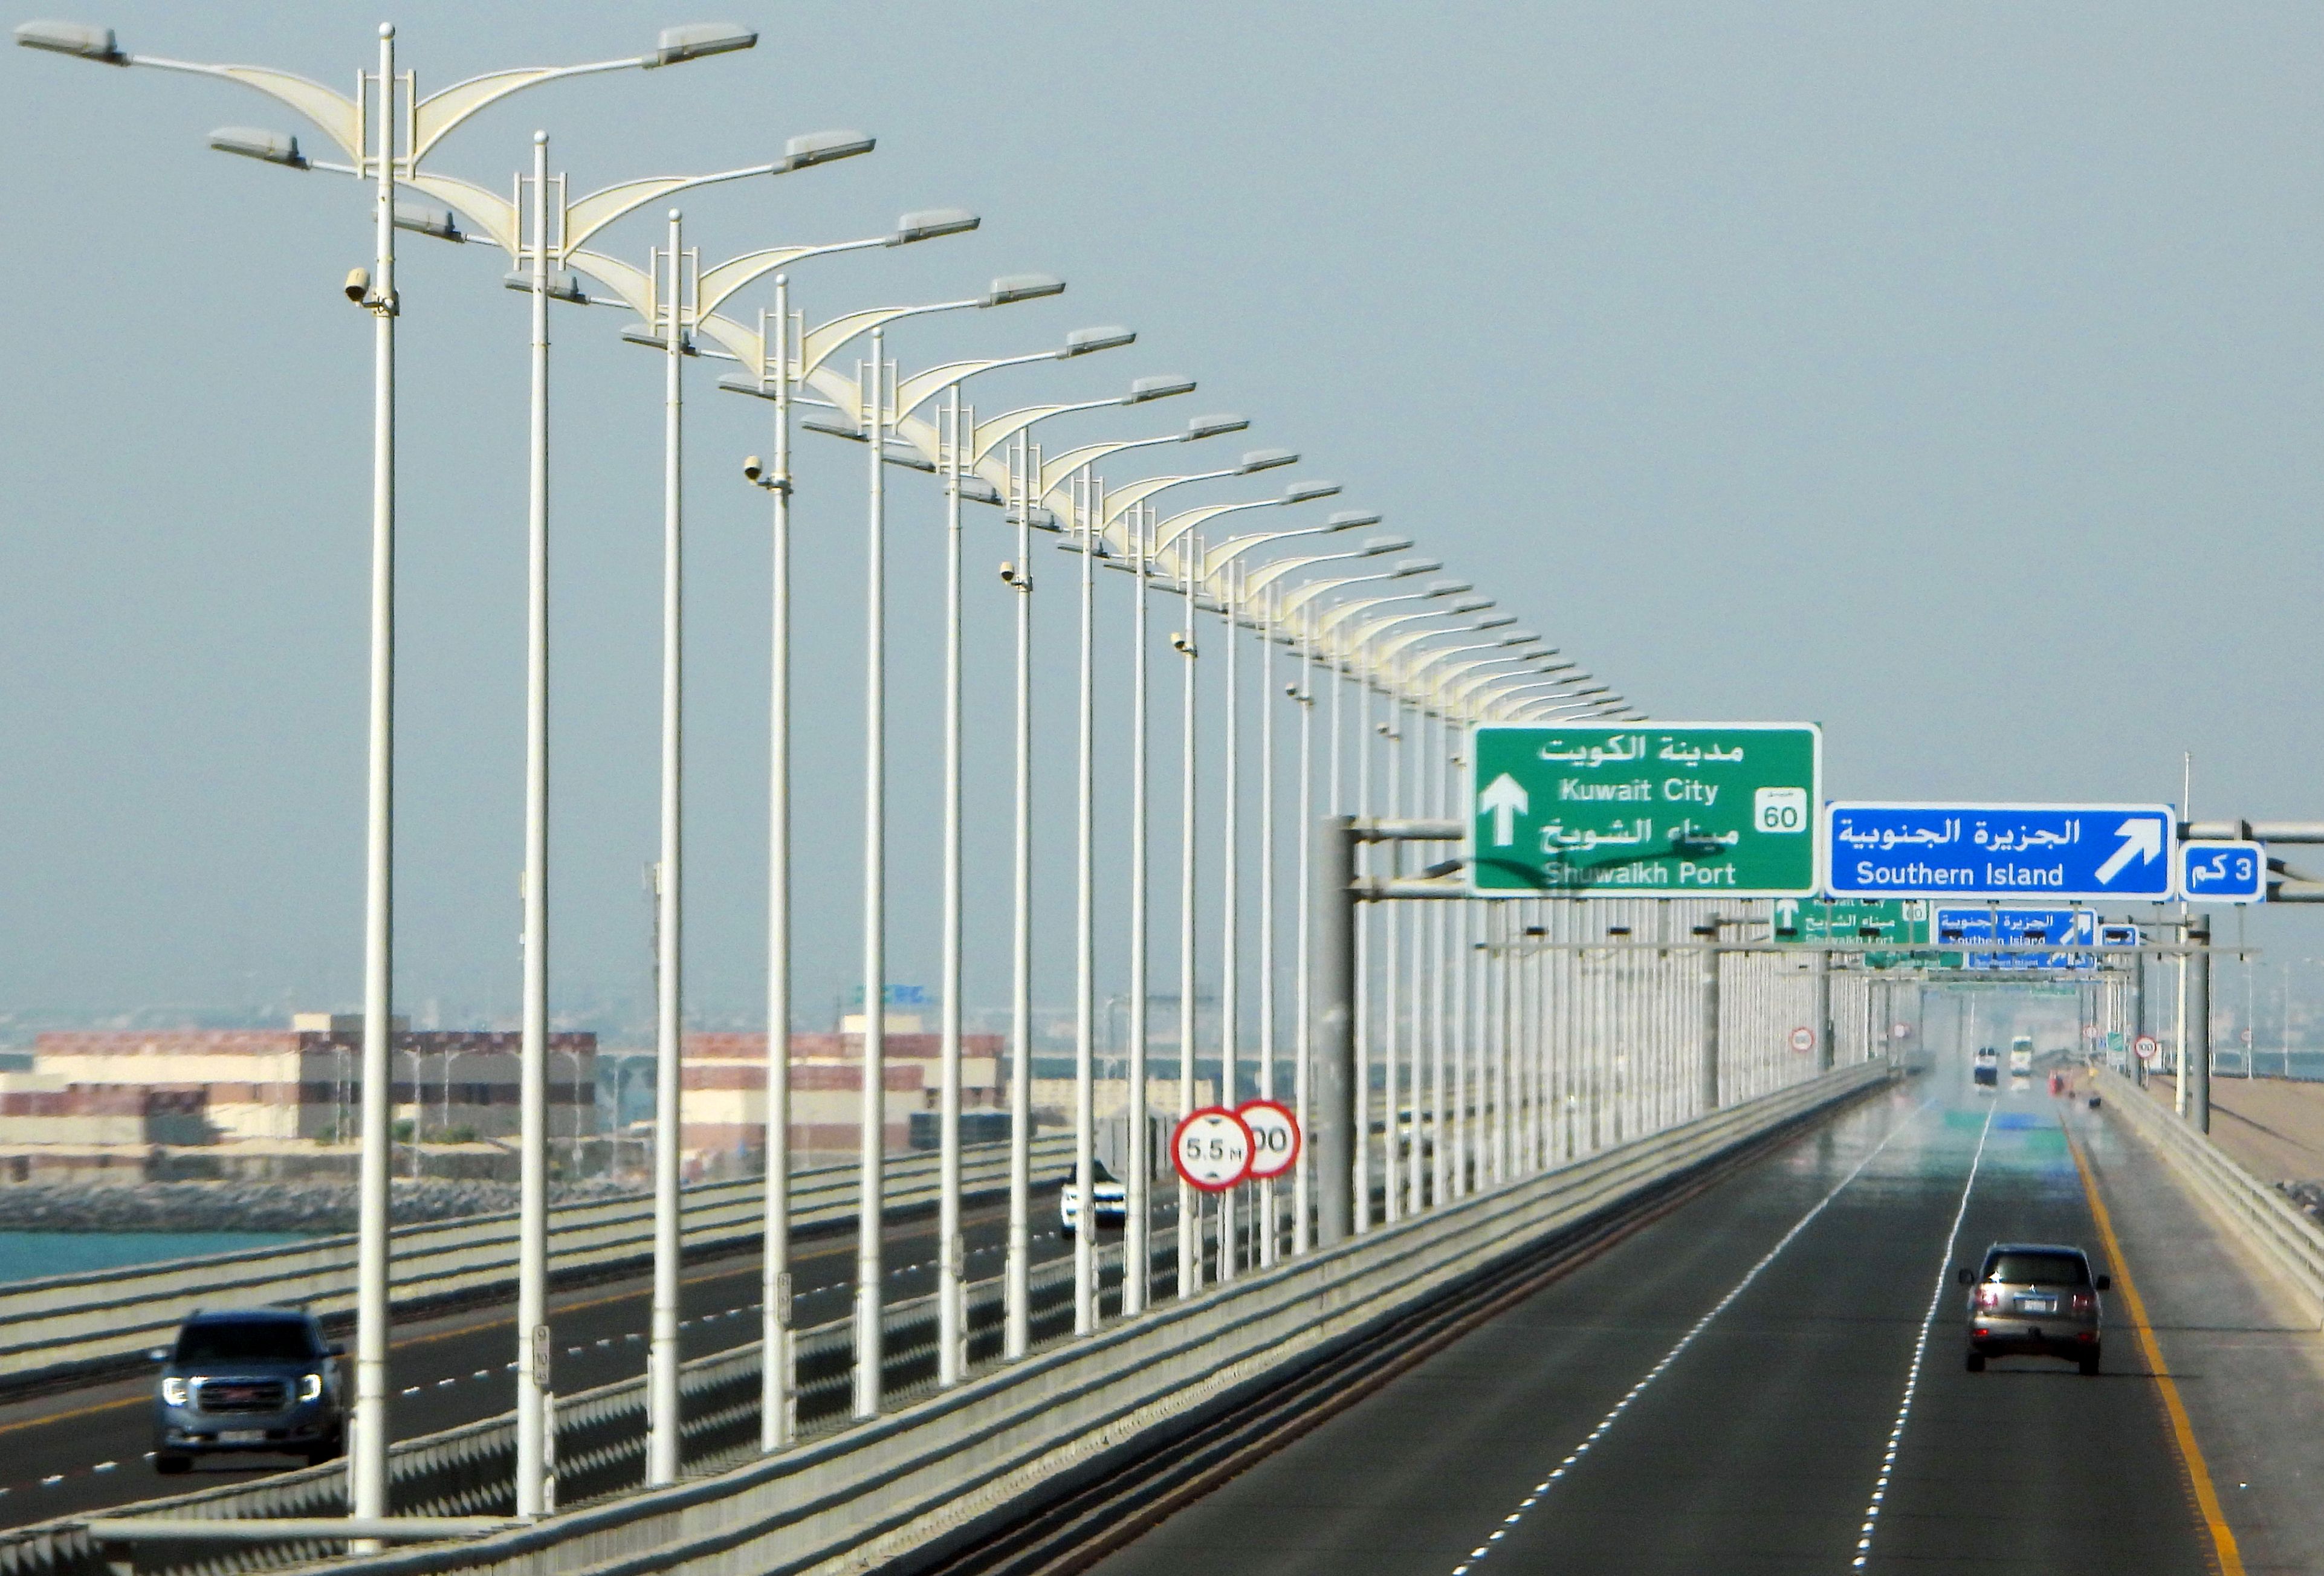 This picture taken  on June 21, 2020, shows a partial view of the Sheikh Jaber Causeway in Kuwait City. - The causeway project, which includes two paths over the Kuwait Bay, is the worlds biggest maritime causeway project.nUndertaken by Kuwait Ministry of Public Works (MPW), the construction began in 2013 and was officially inaugurated in May 2019. (Photo by YASSER AL-ZAYYAT / AFP)